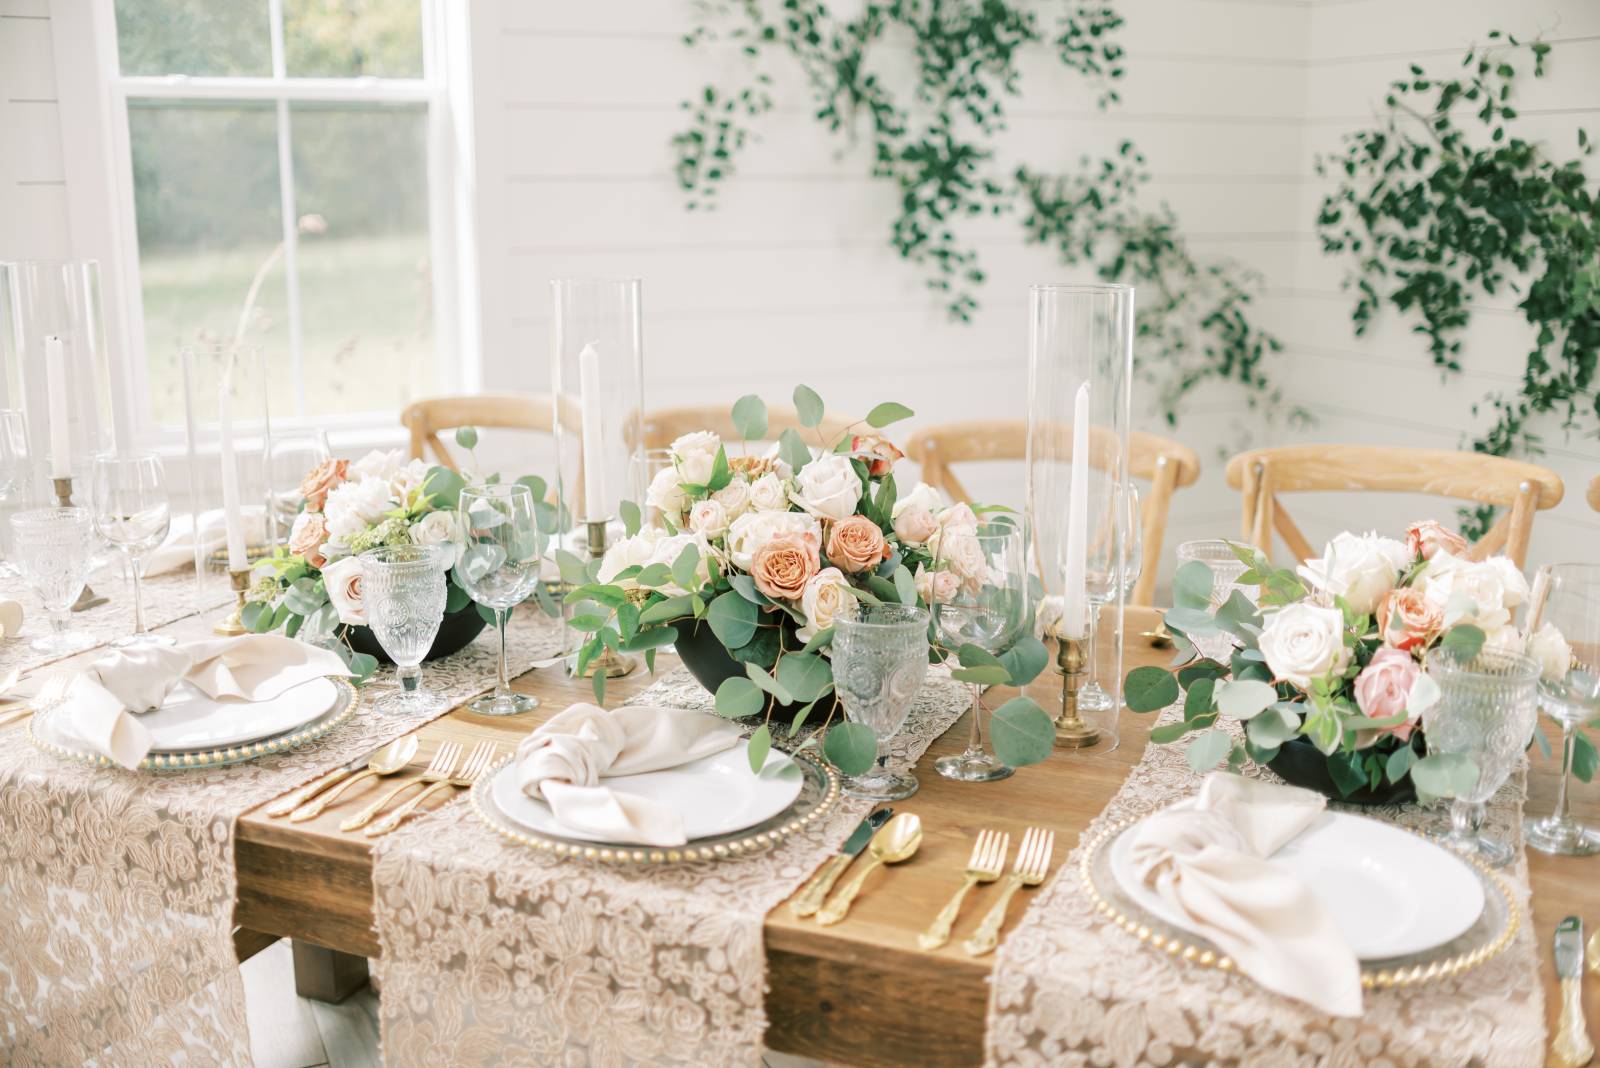 Table setting with lace